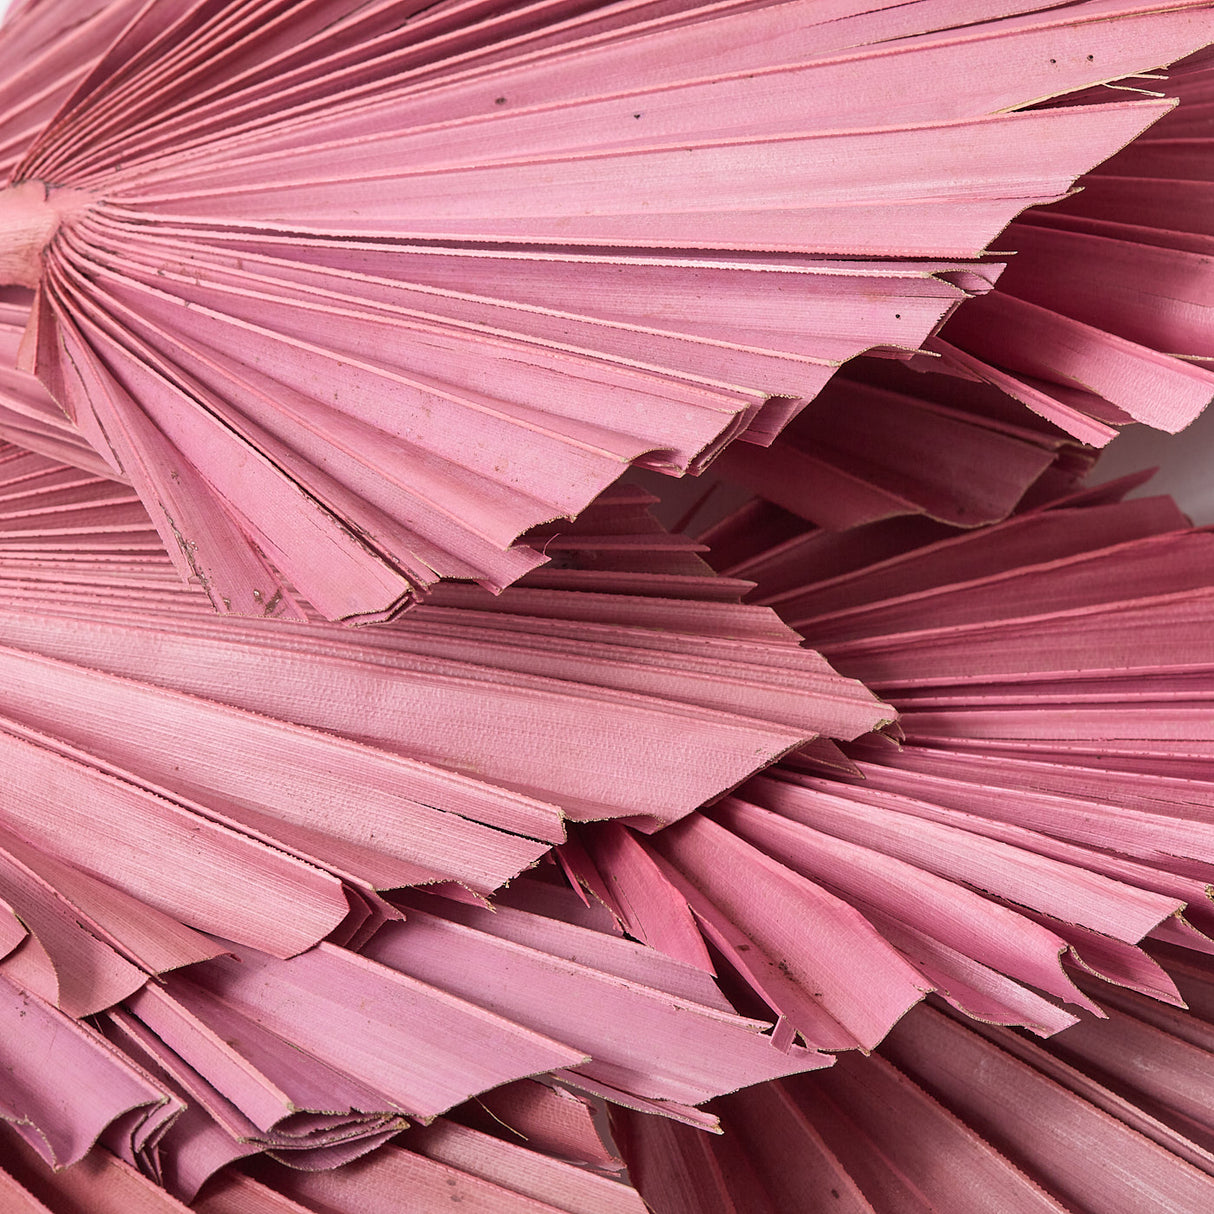 This is a close up of dried palm spear heads, in antique pink colour.